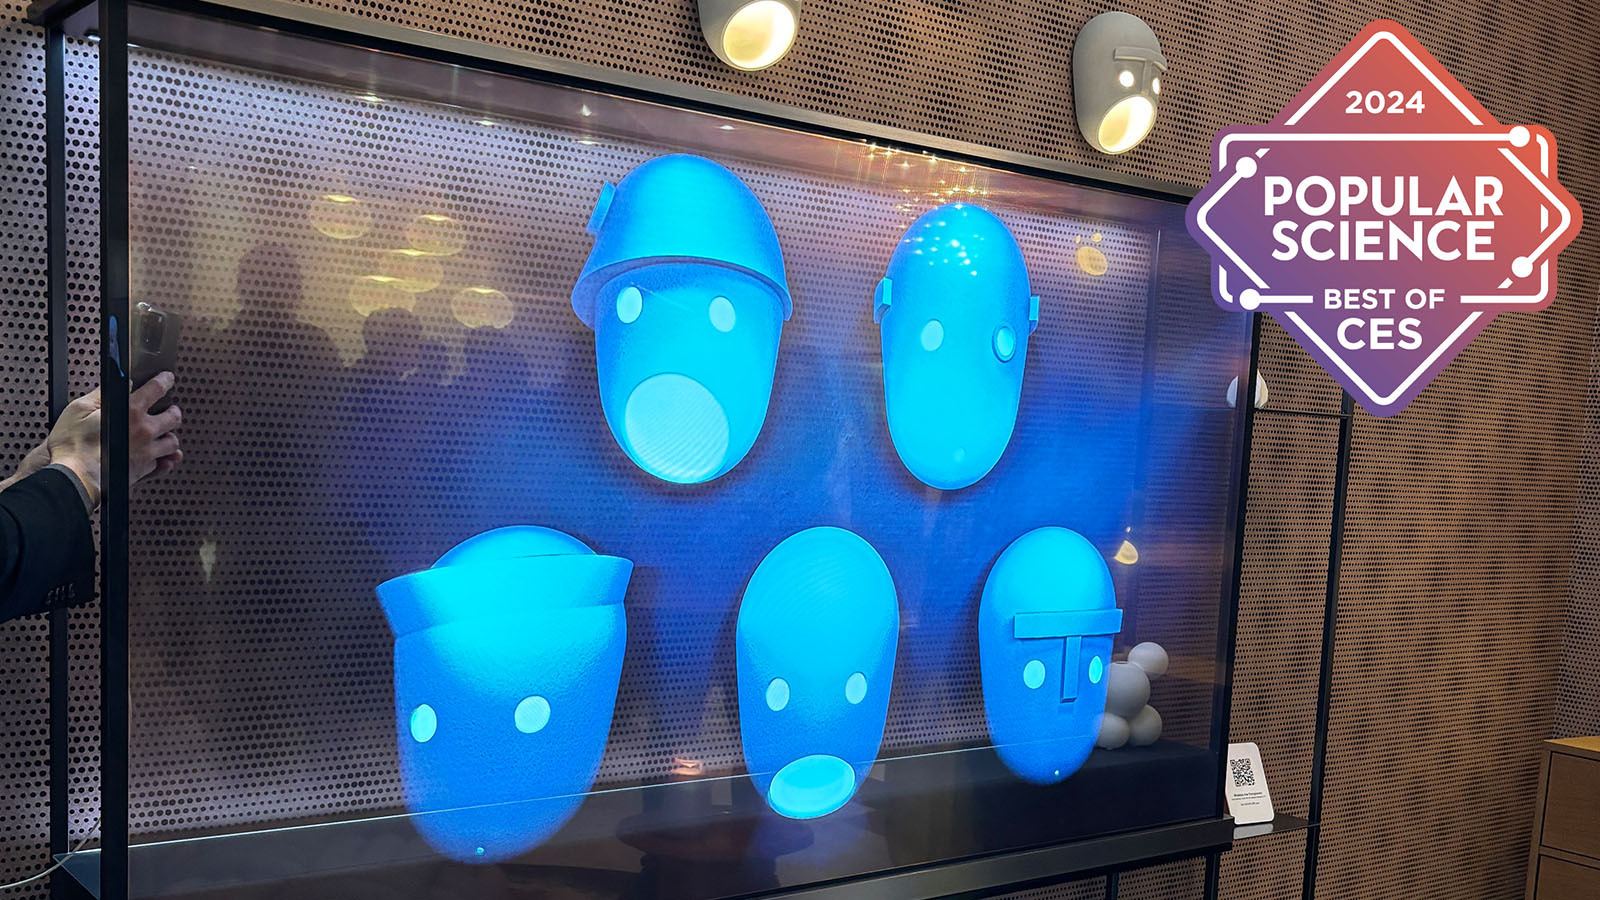 The LG Signature transparent TV with weird blue heads on the screen